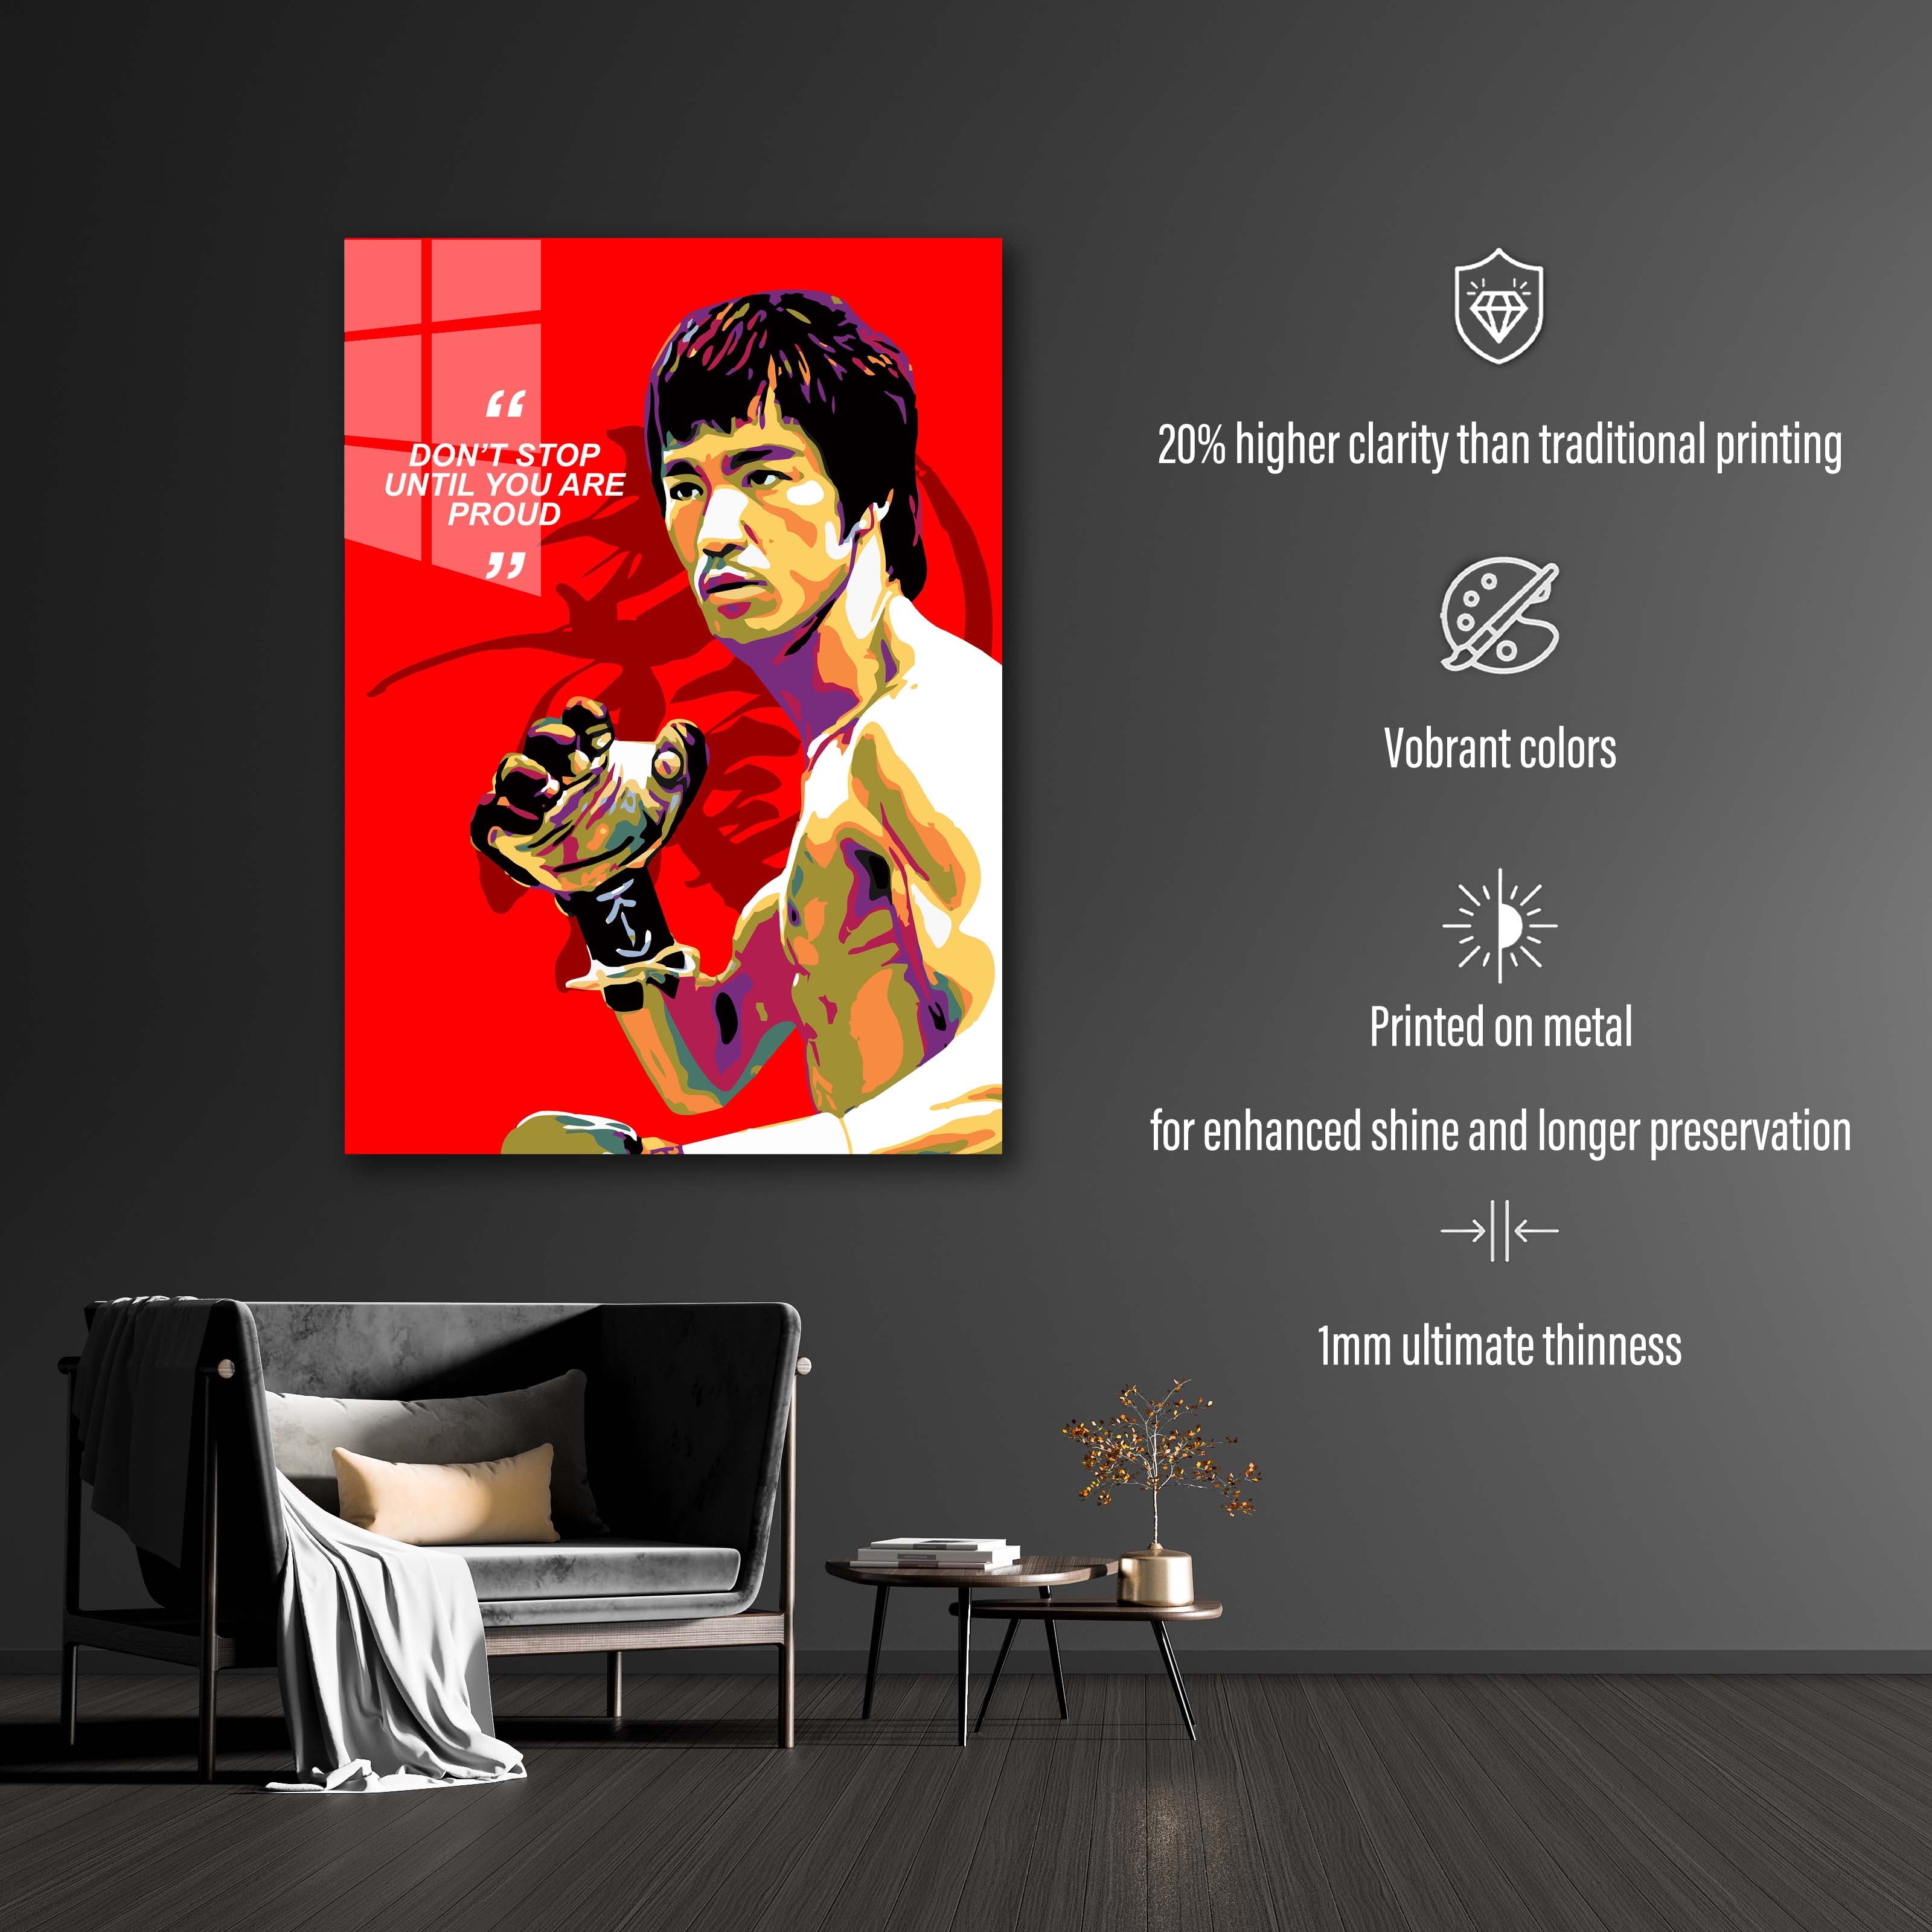 The Legend of Bruce Lee-designed by @ahmad hanapii